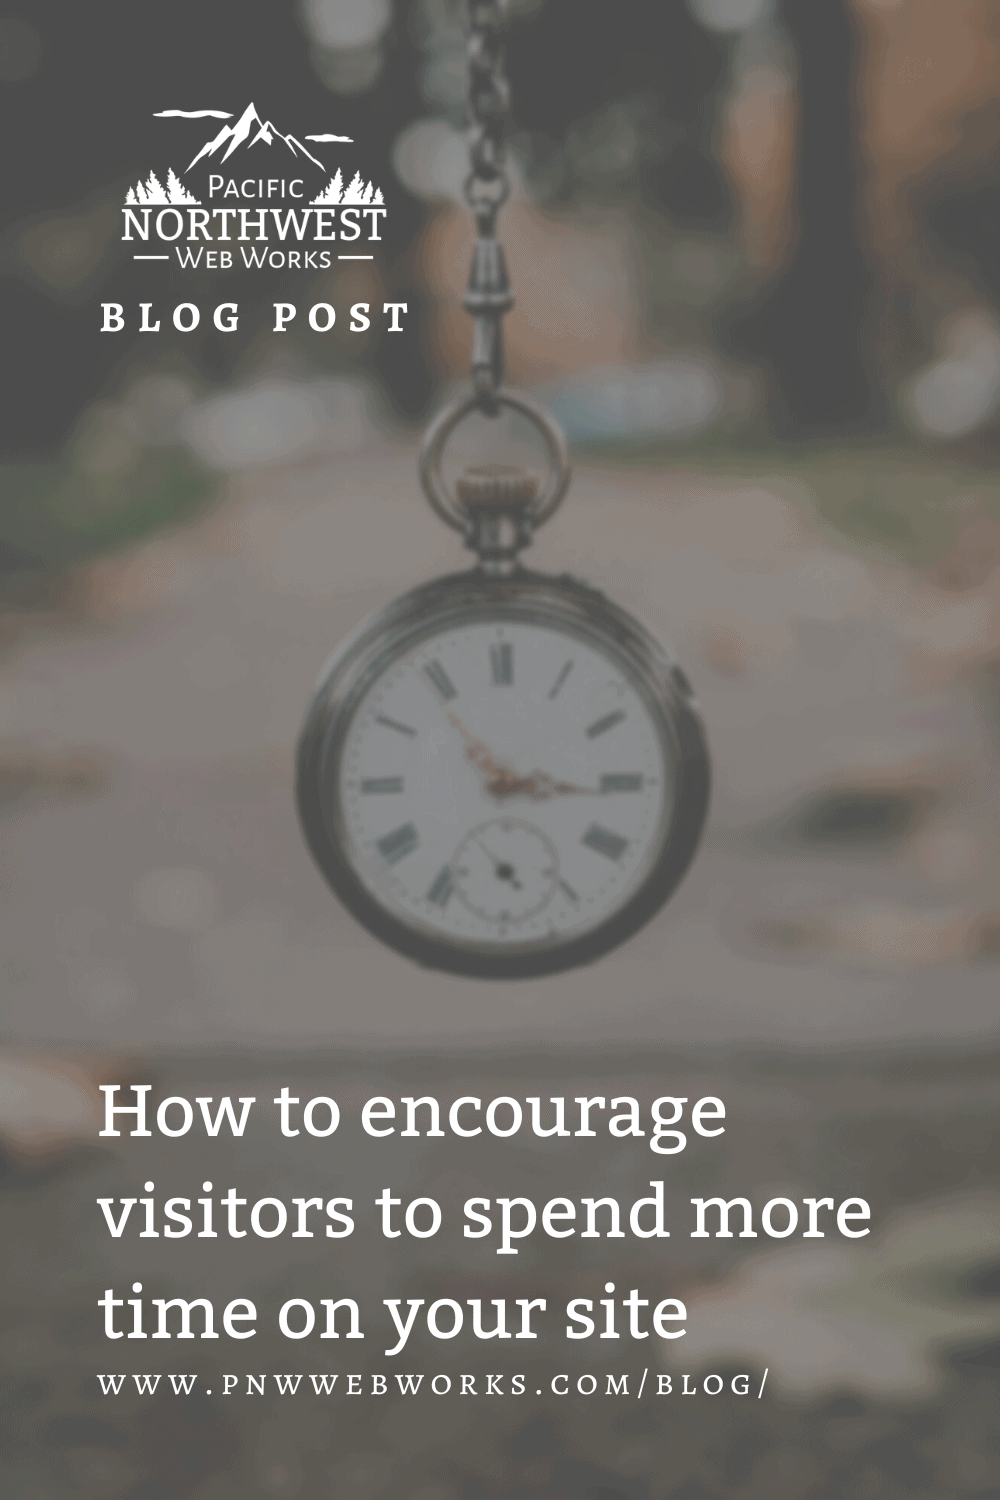 How to encourage visitors to spend more time on your site